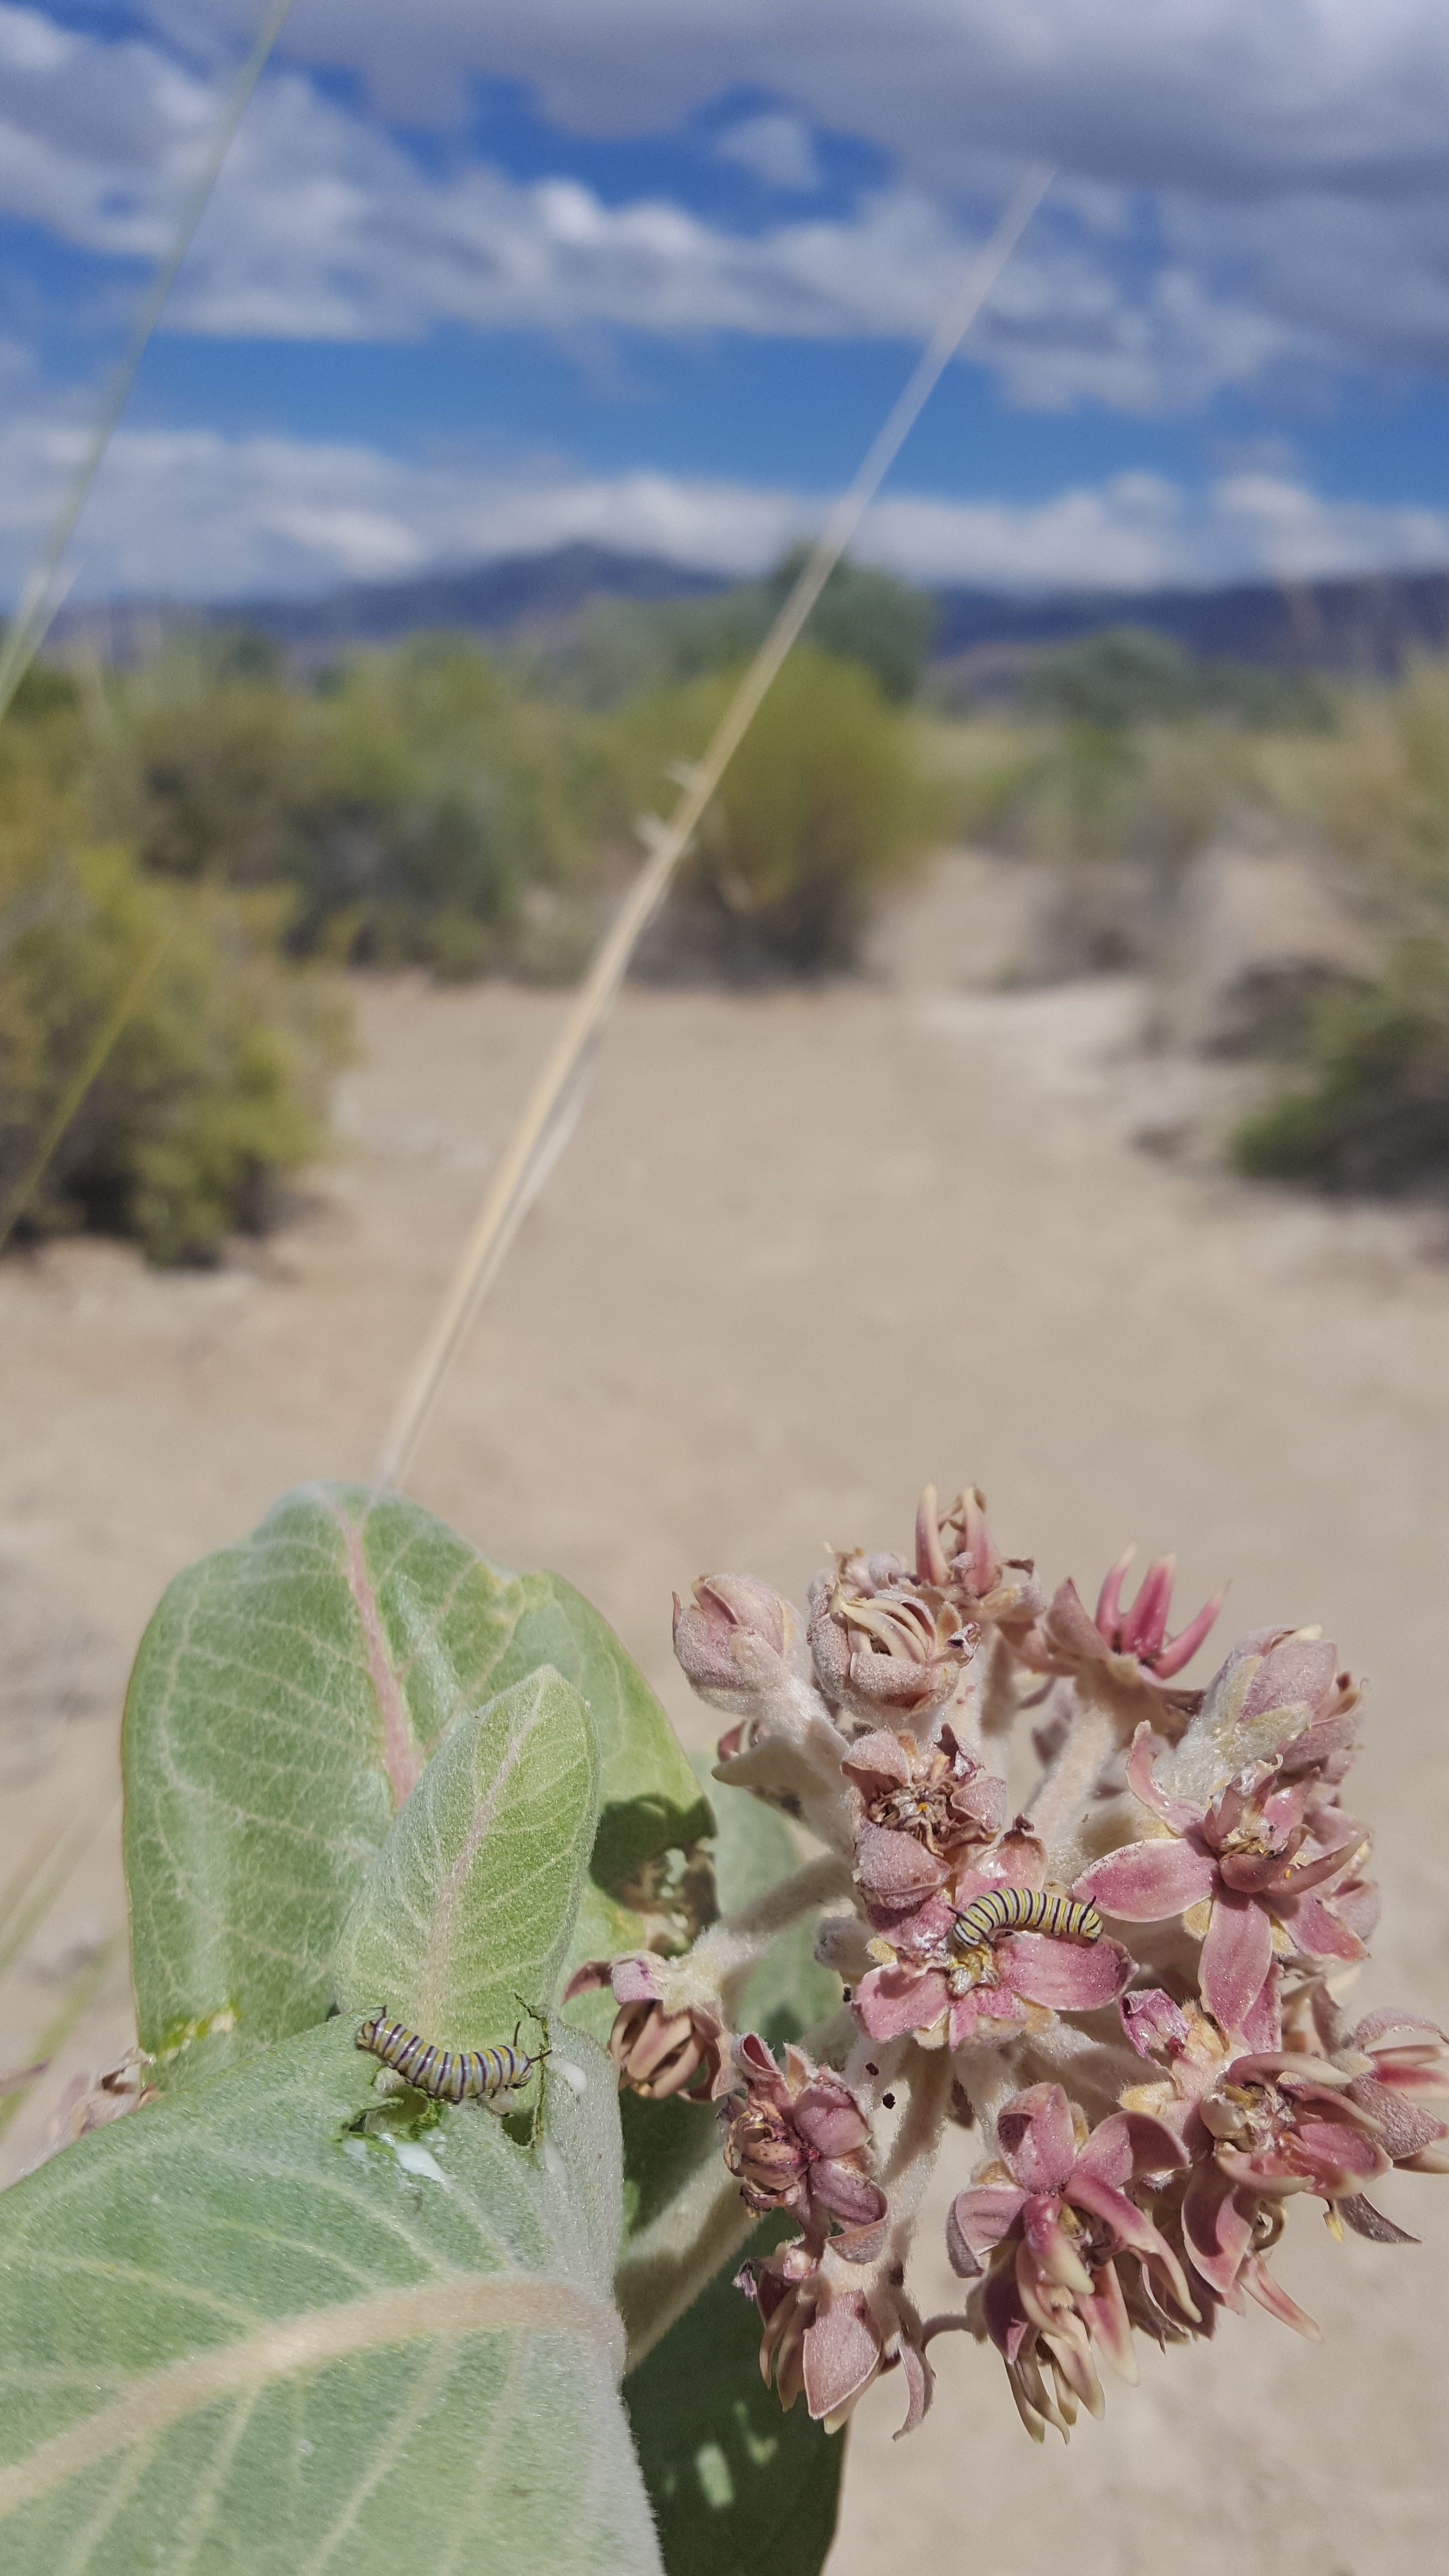 Monarch larvae crawl on the pink blooms of a showy milkweed, with an arid landscape in the background.